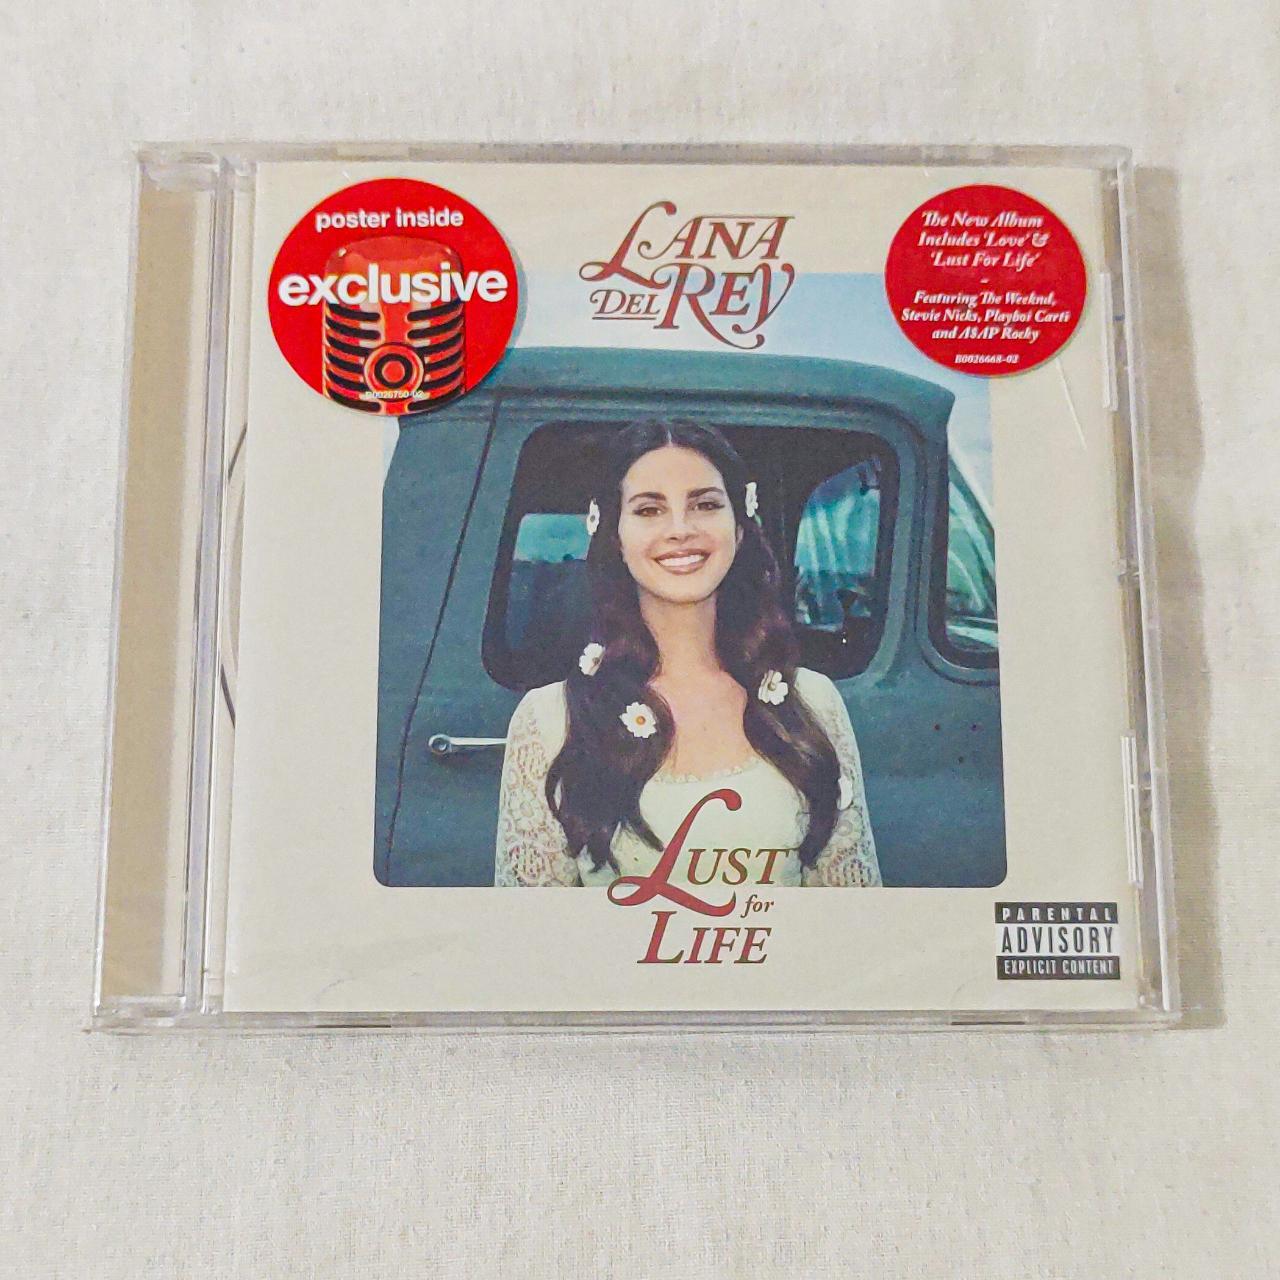 Lust For Life (CD) (explicit)